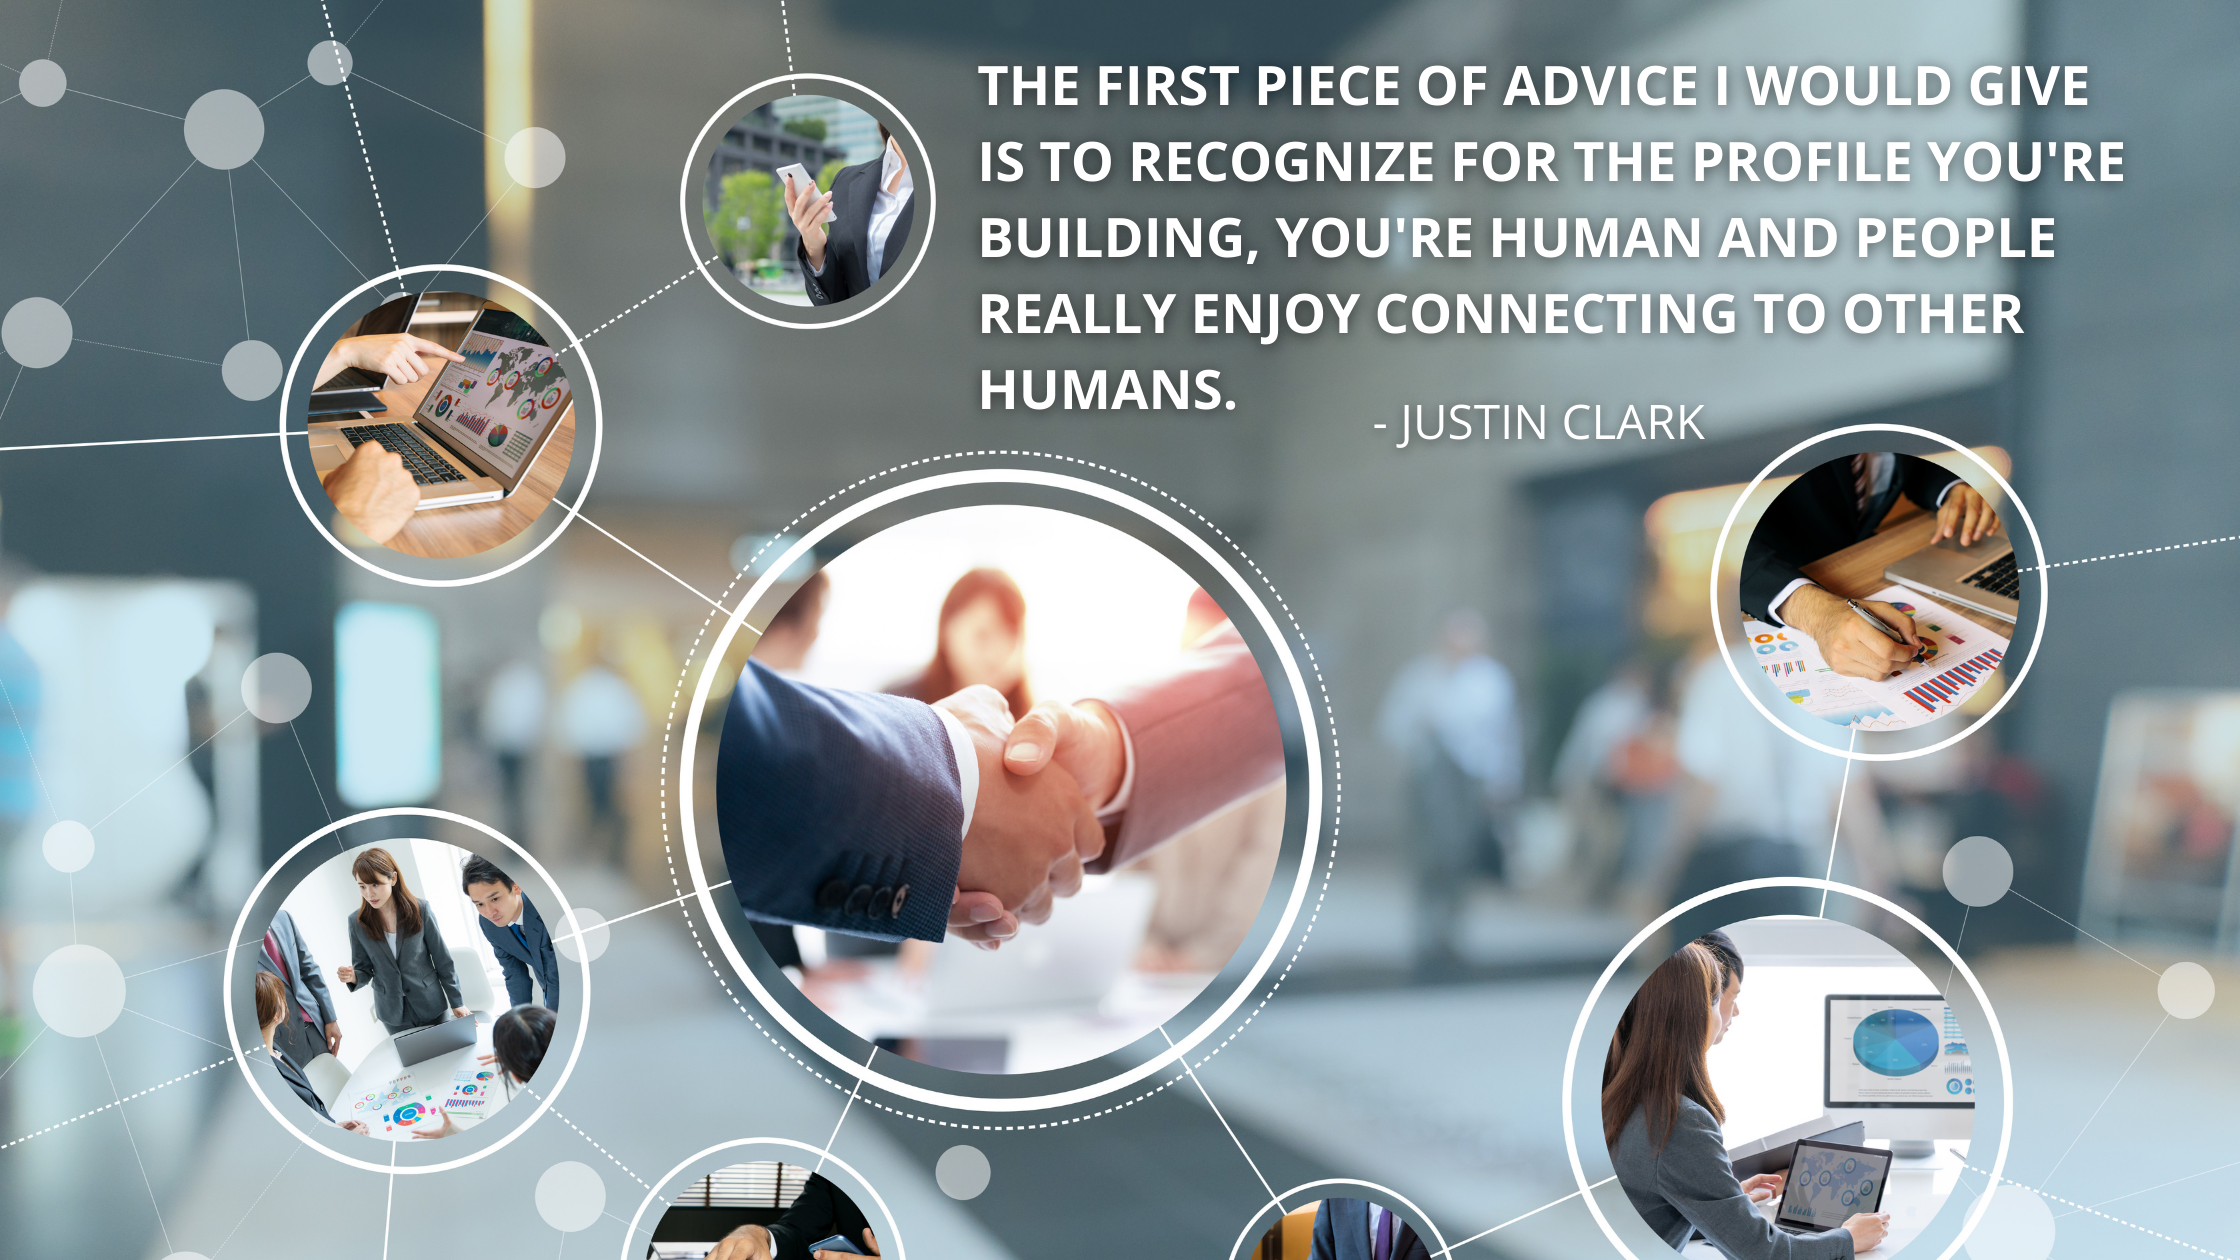 Quote from Justin Clark